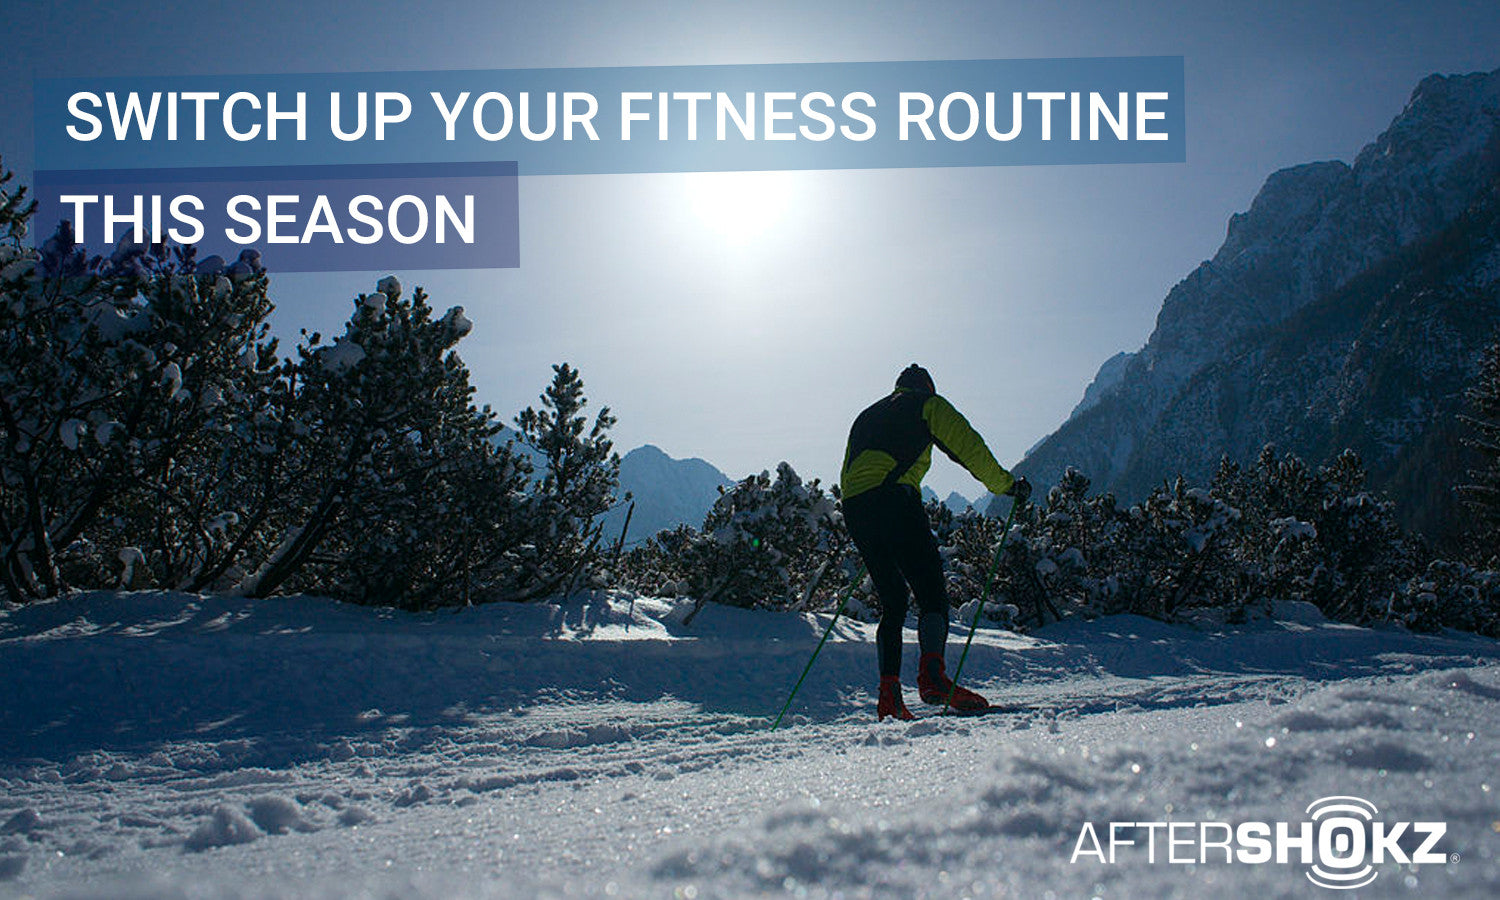 Tips For Switching Up Your Fitness Routine For Winter